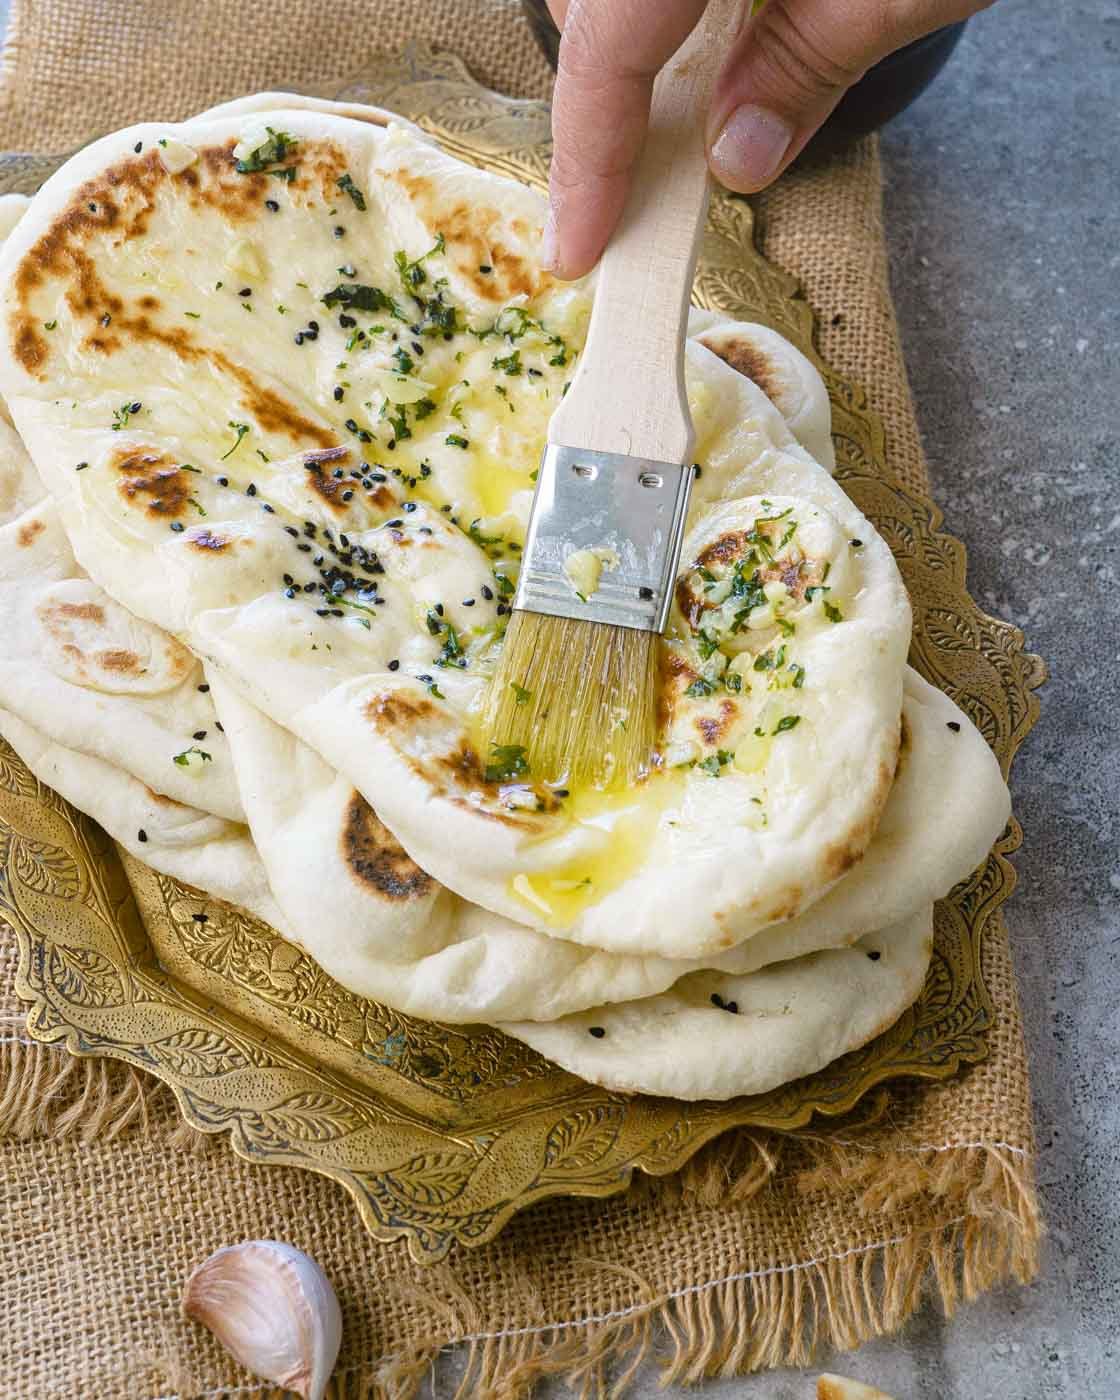 10 Essential Indian Cooking Tools for Making Perfect Flatbreads, Fritters,  and Curries